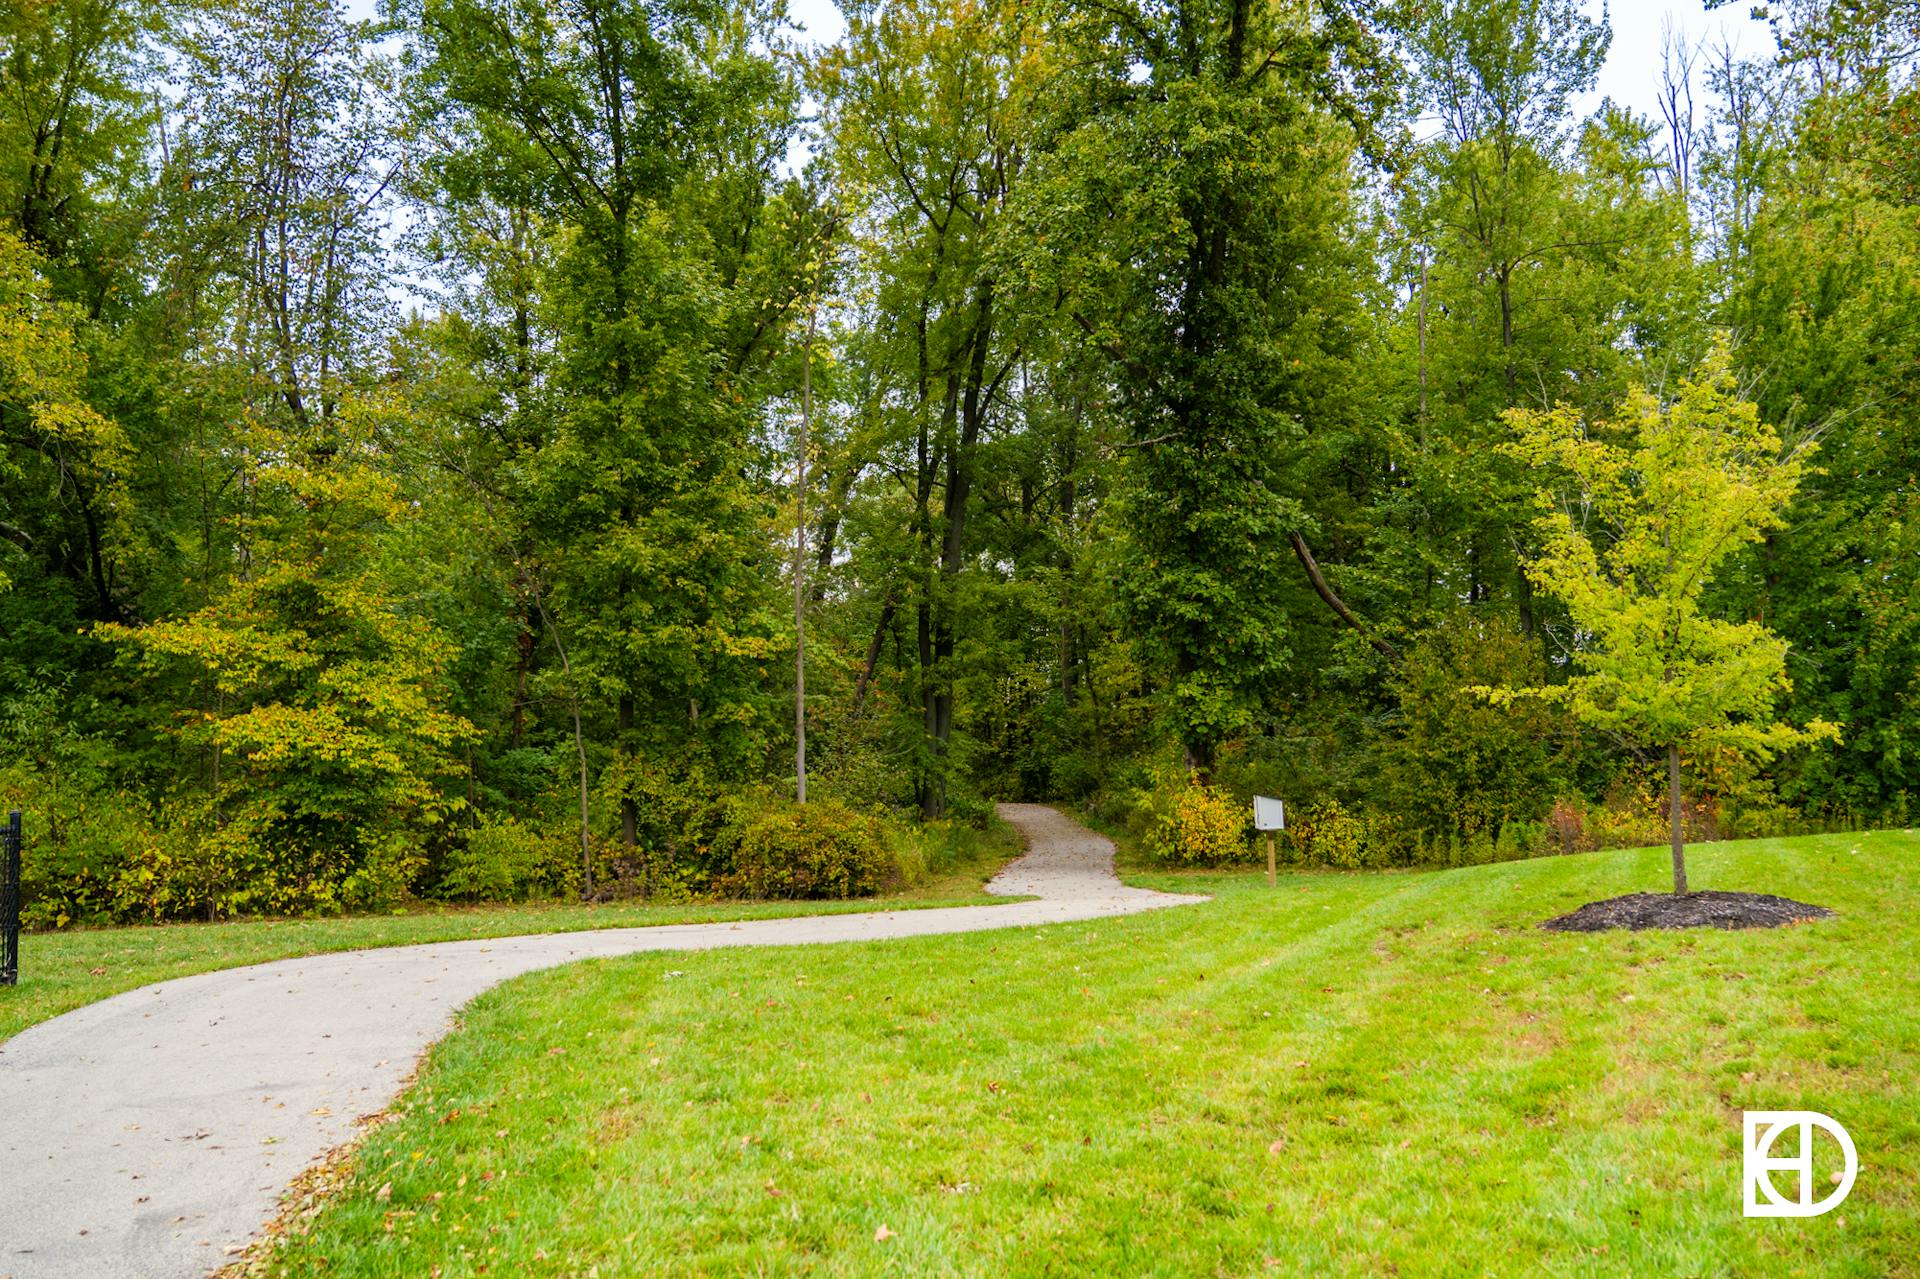 Photo of walking path into woods in Hampshire neighborhood in Zionsville, Indiana.